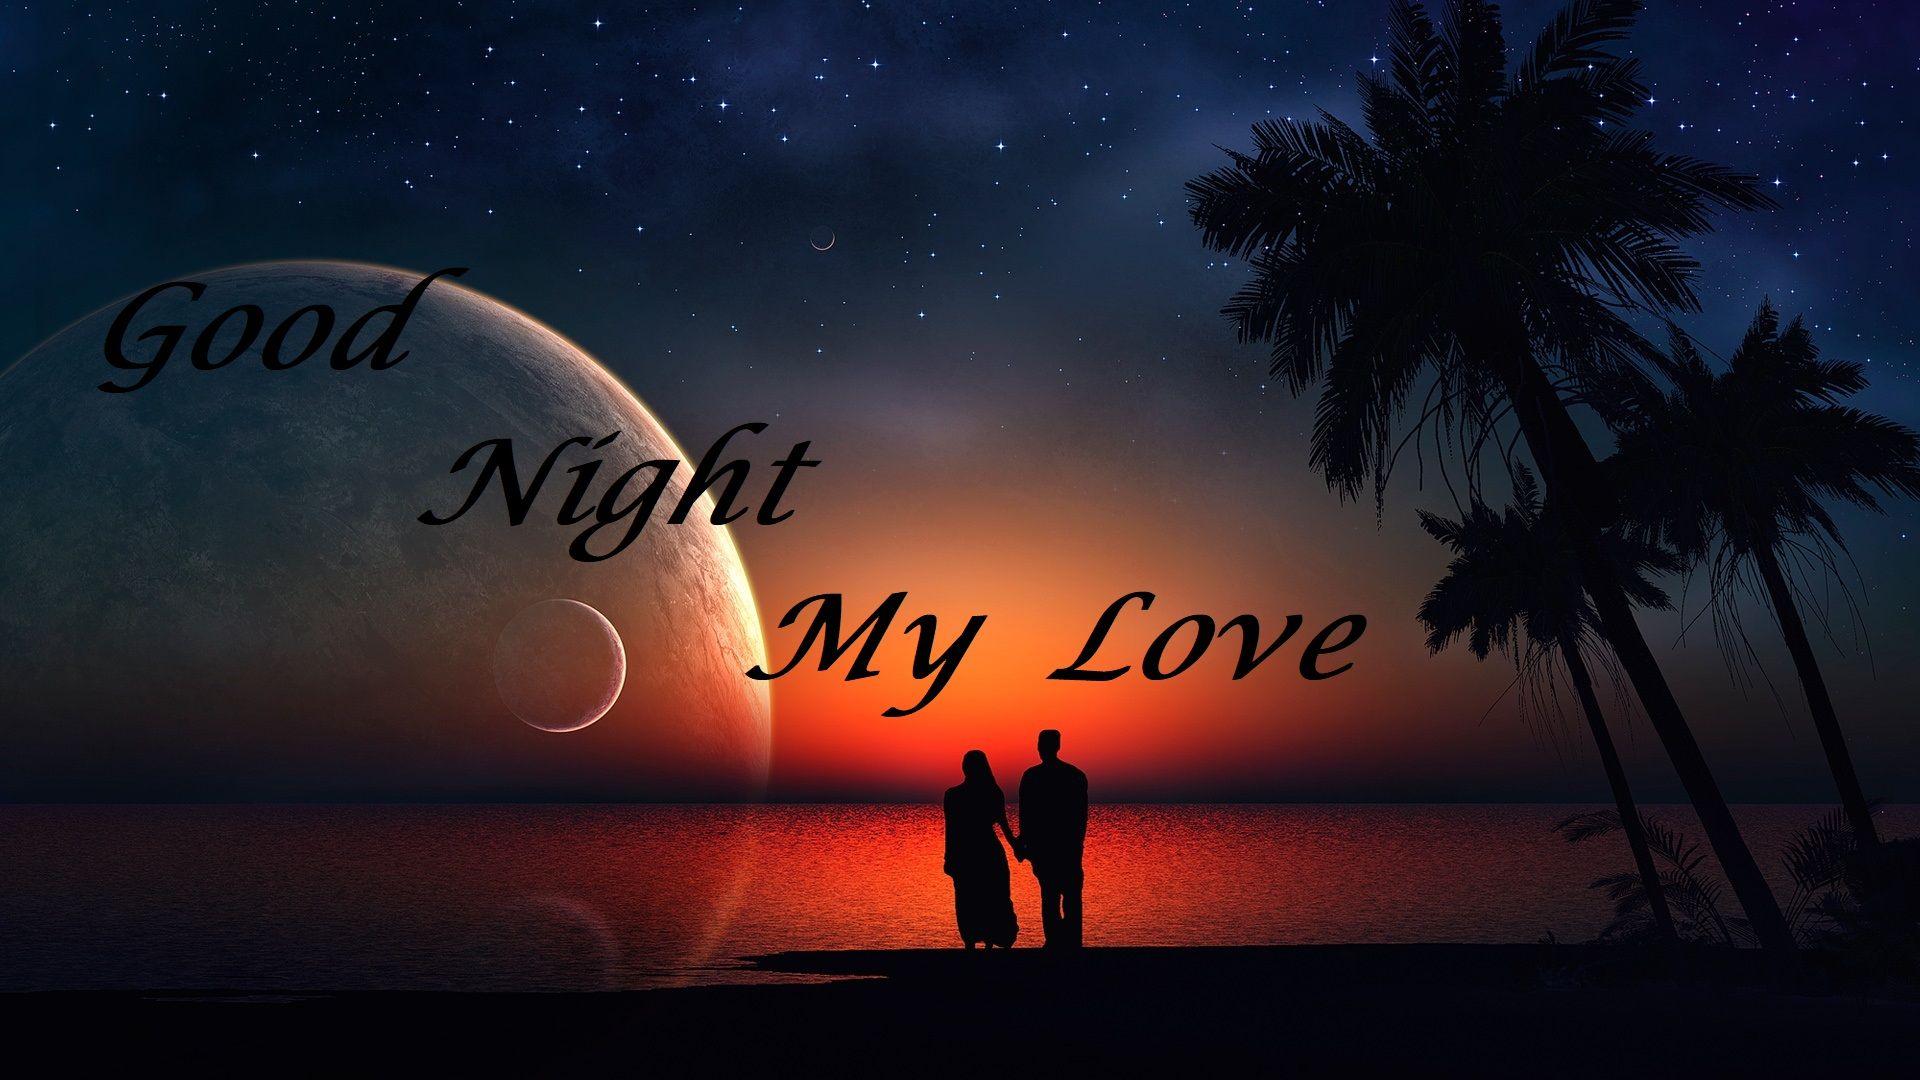 Best Good Night Greeting Quotes HD Picture Image Downloads